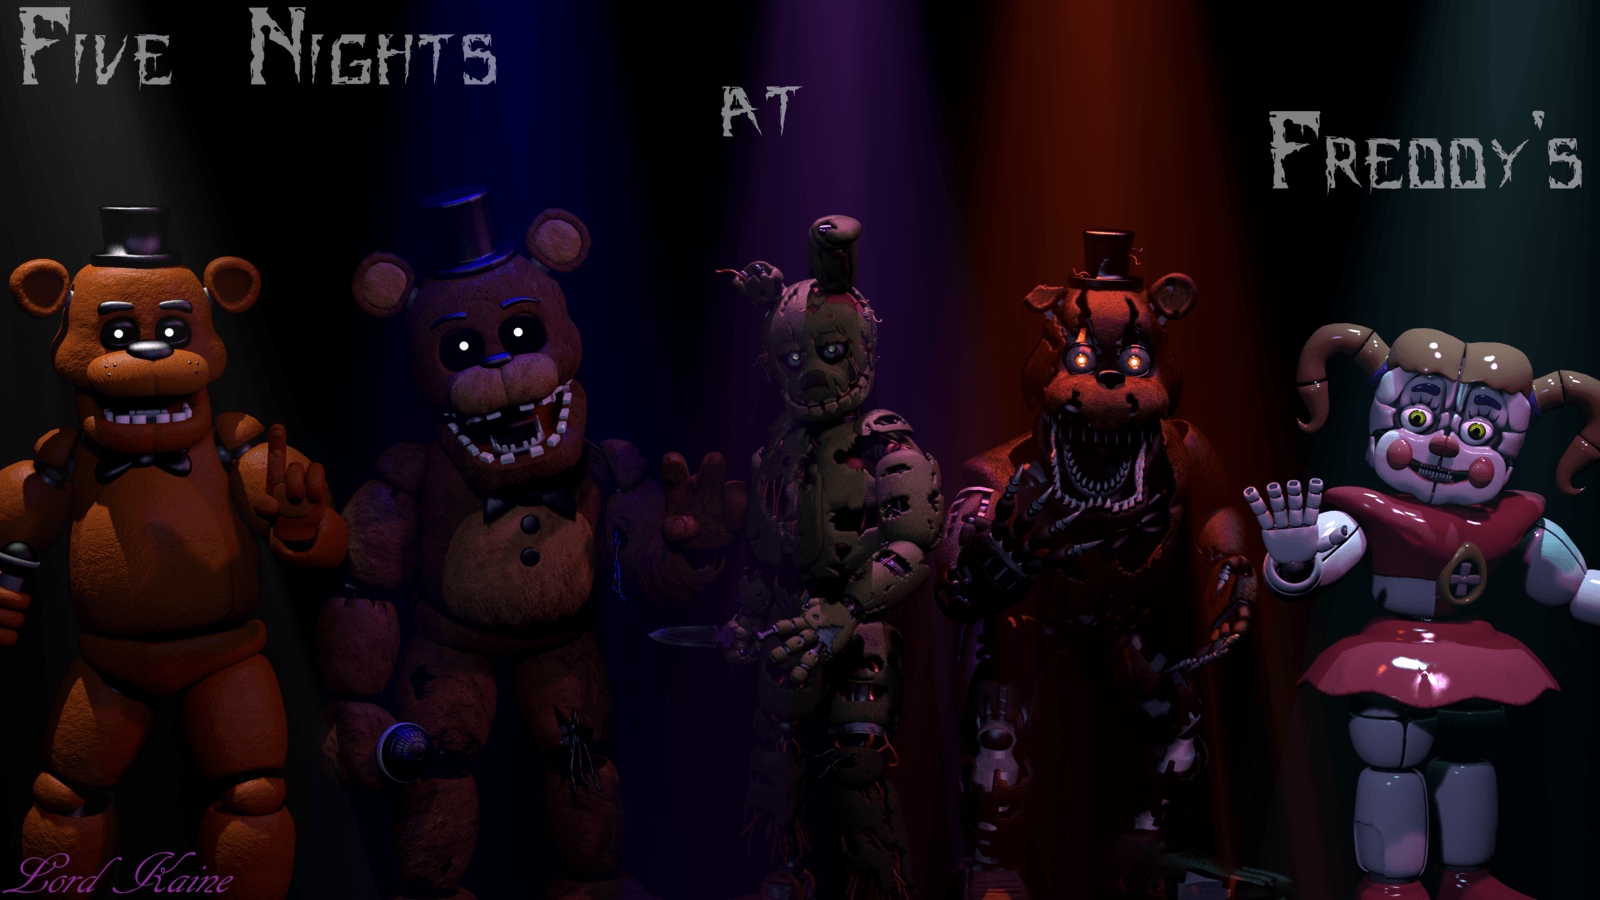 five nights at freddy's wallpaper,purple,darkness,pc game,violet,fiction